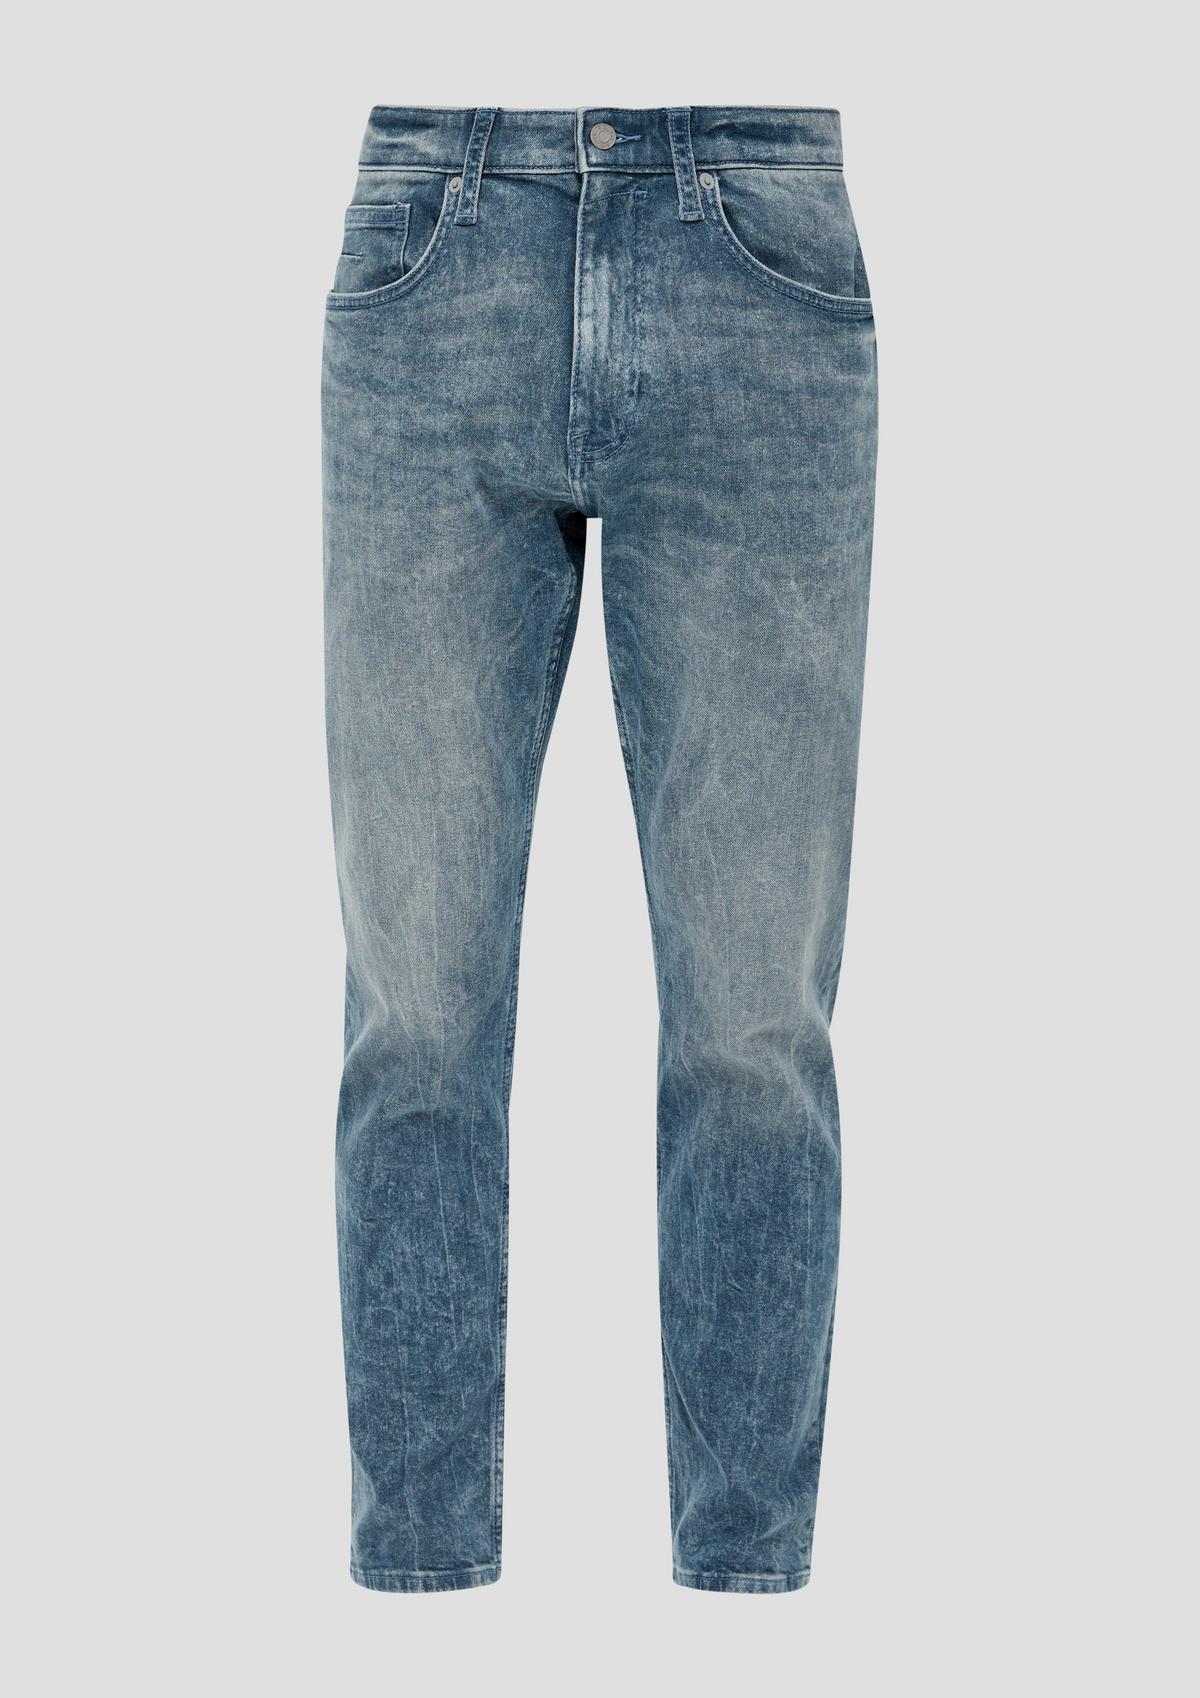 s.Oliver Jeans Mauro / regular fit / high rise / tapered leg